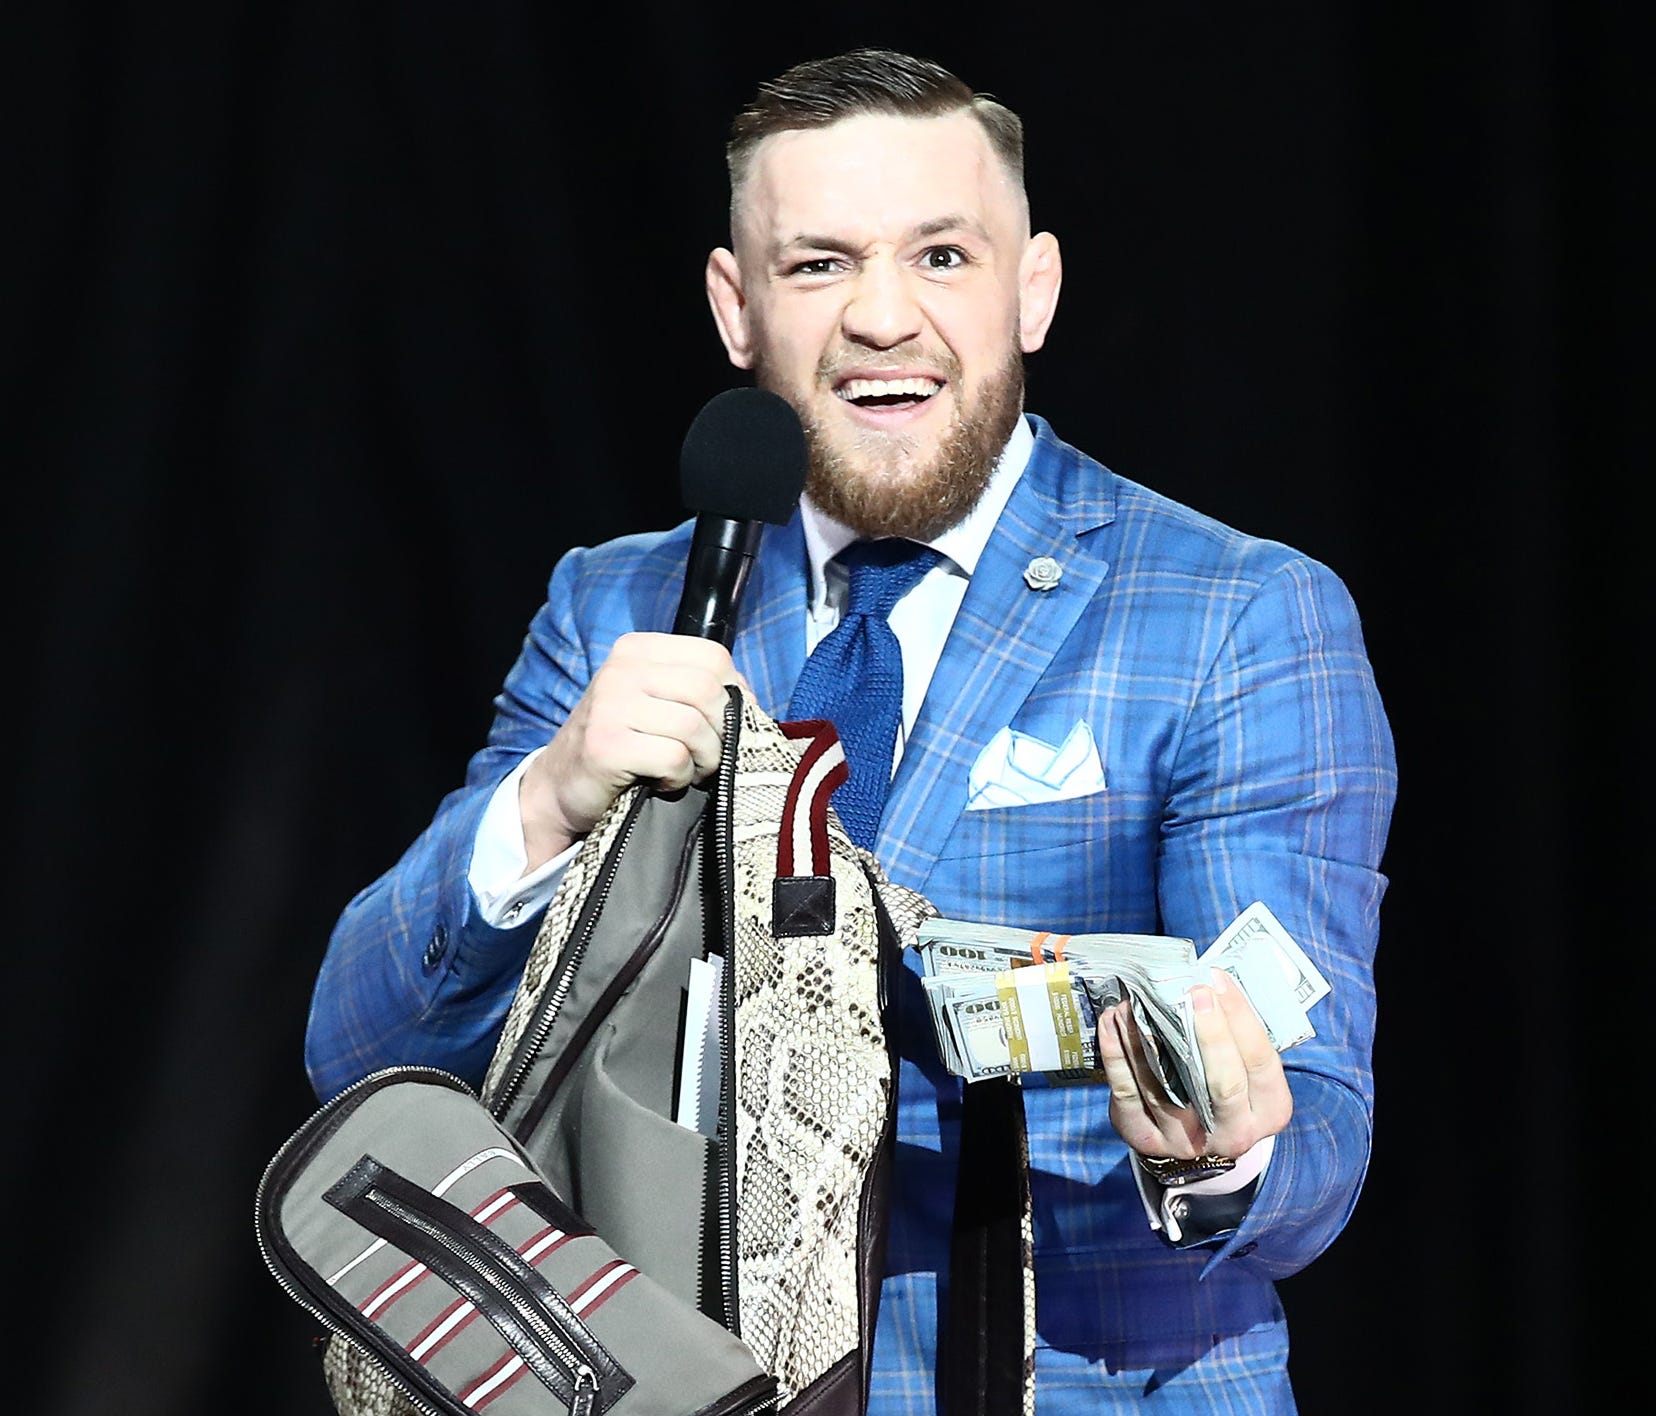 Conor McGregor reacts as he takes cash from a money bag brought onto the stage by Floyd Mayweather during a world tour press conference to promote the Mayweather vs. McGregor fight.